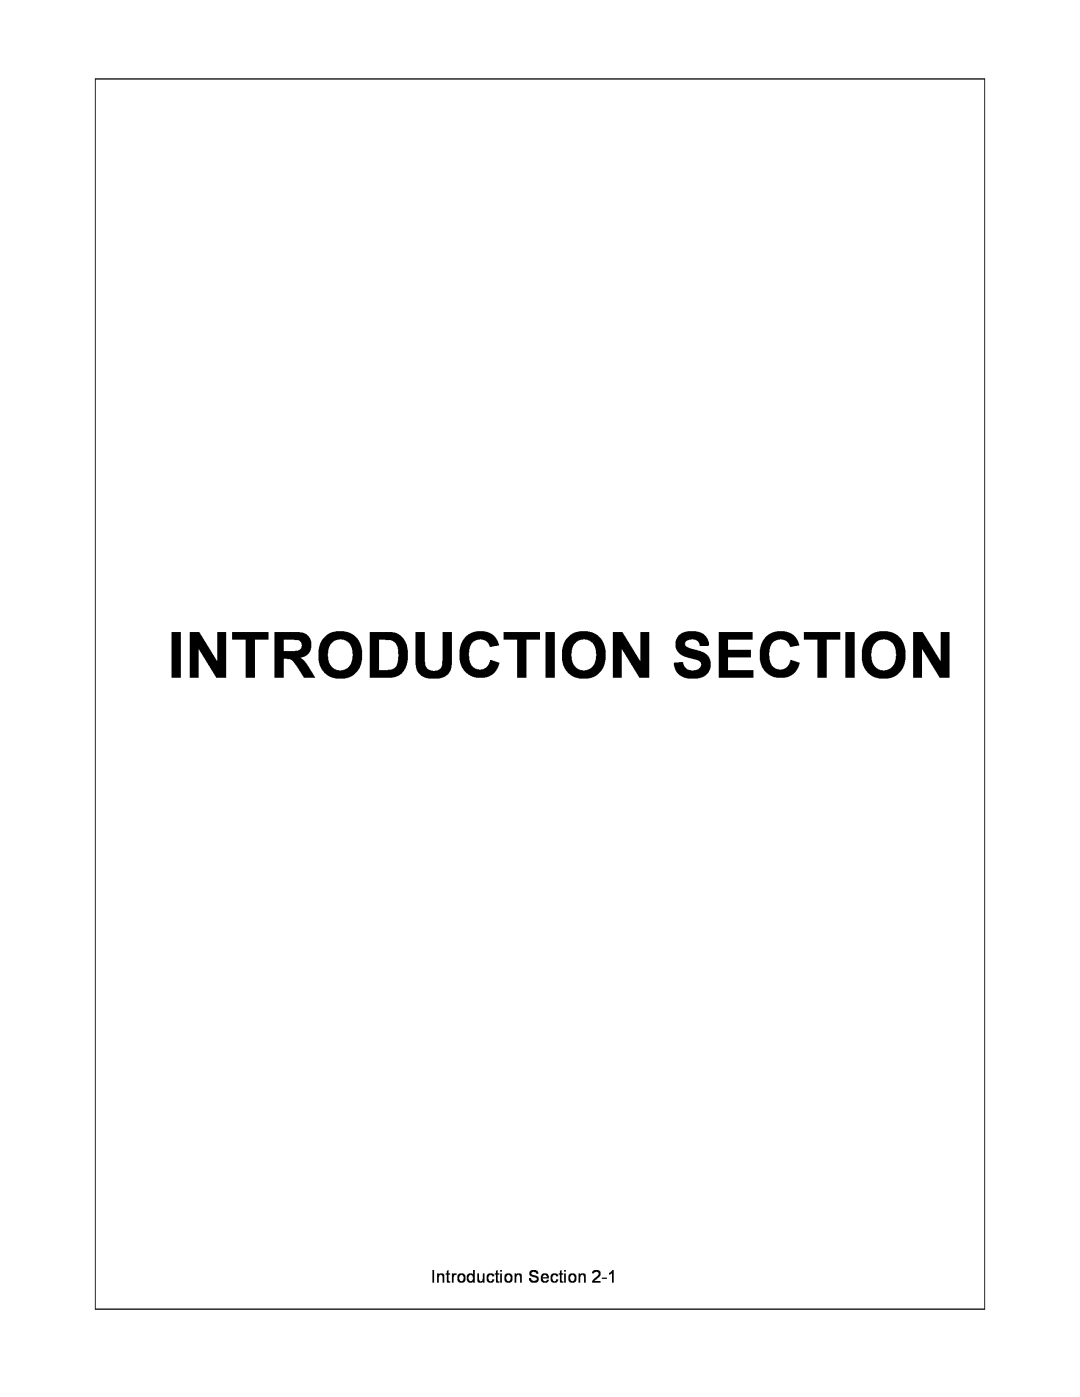 Rhino Mounts 2408 manual Introduction Section 